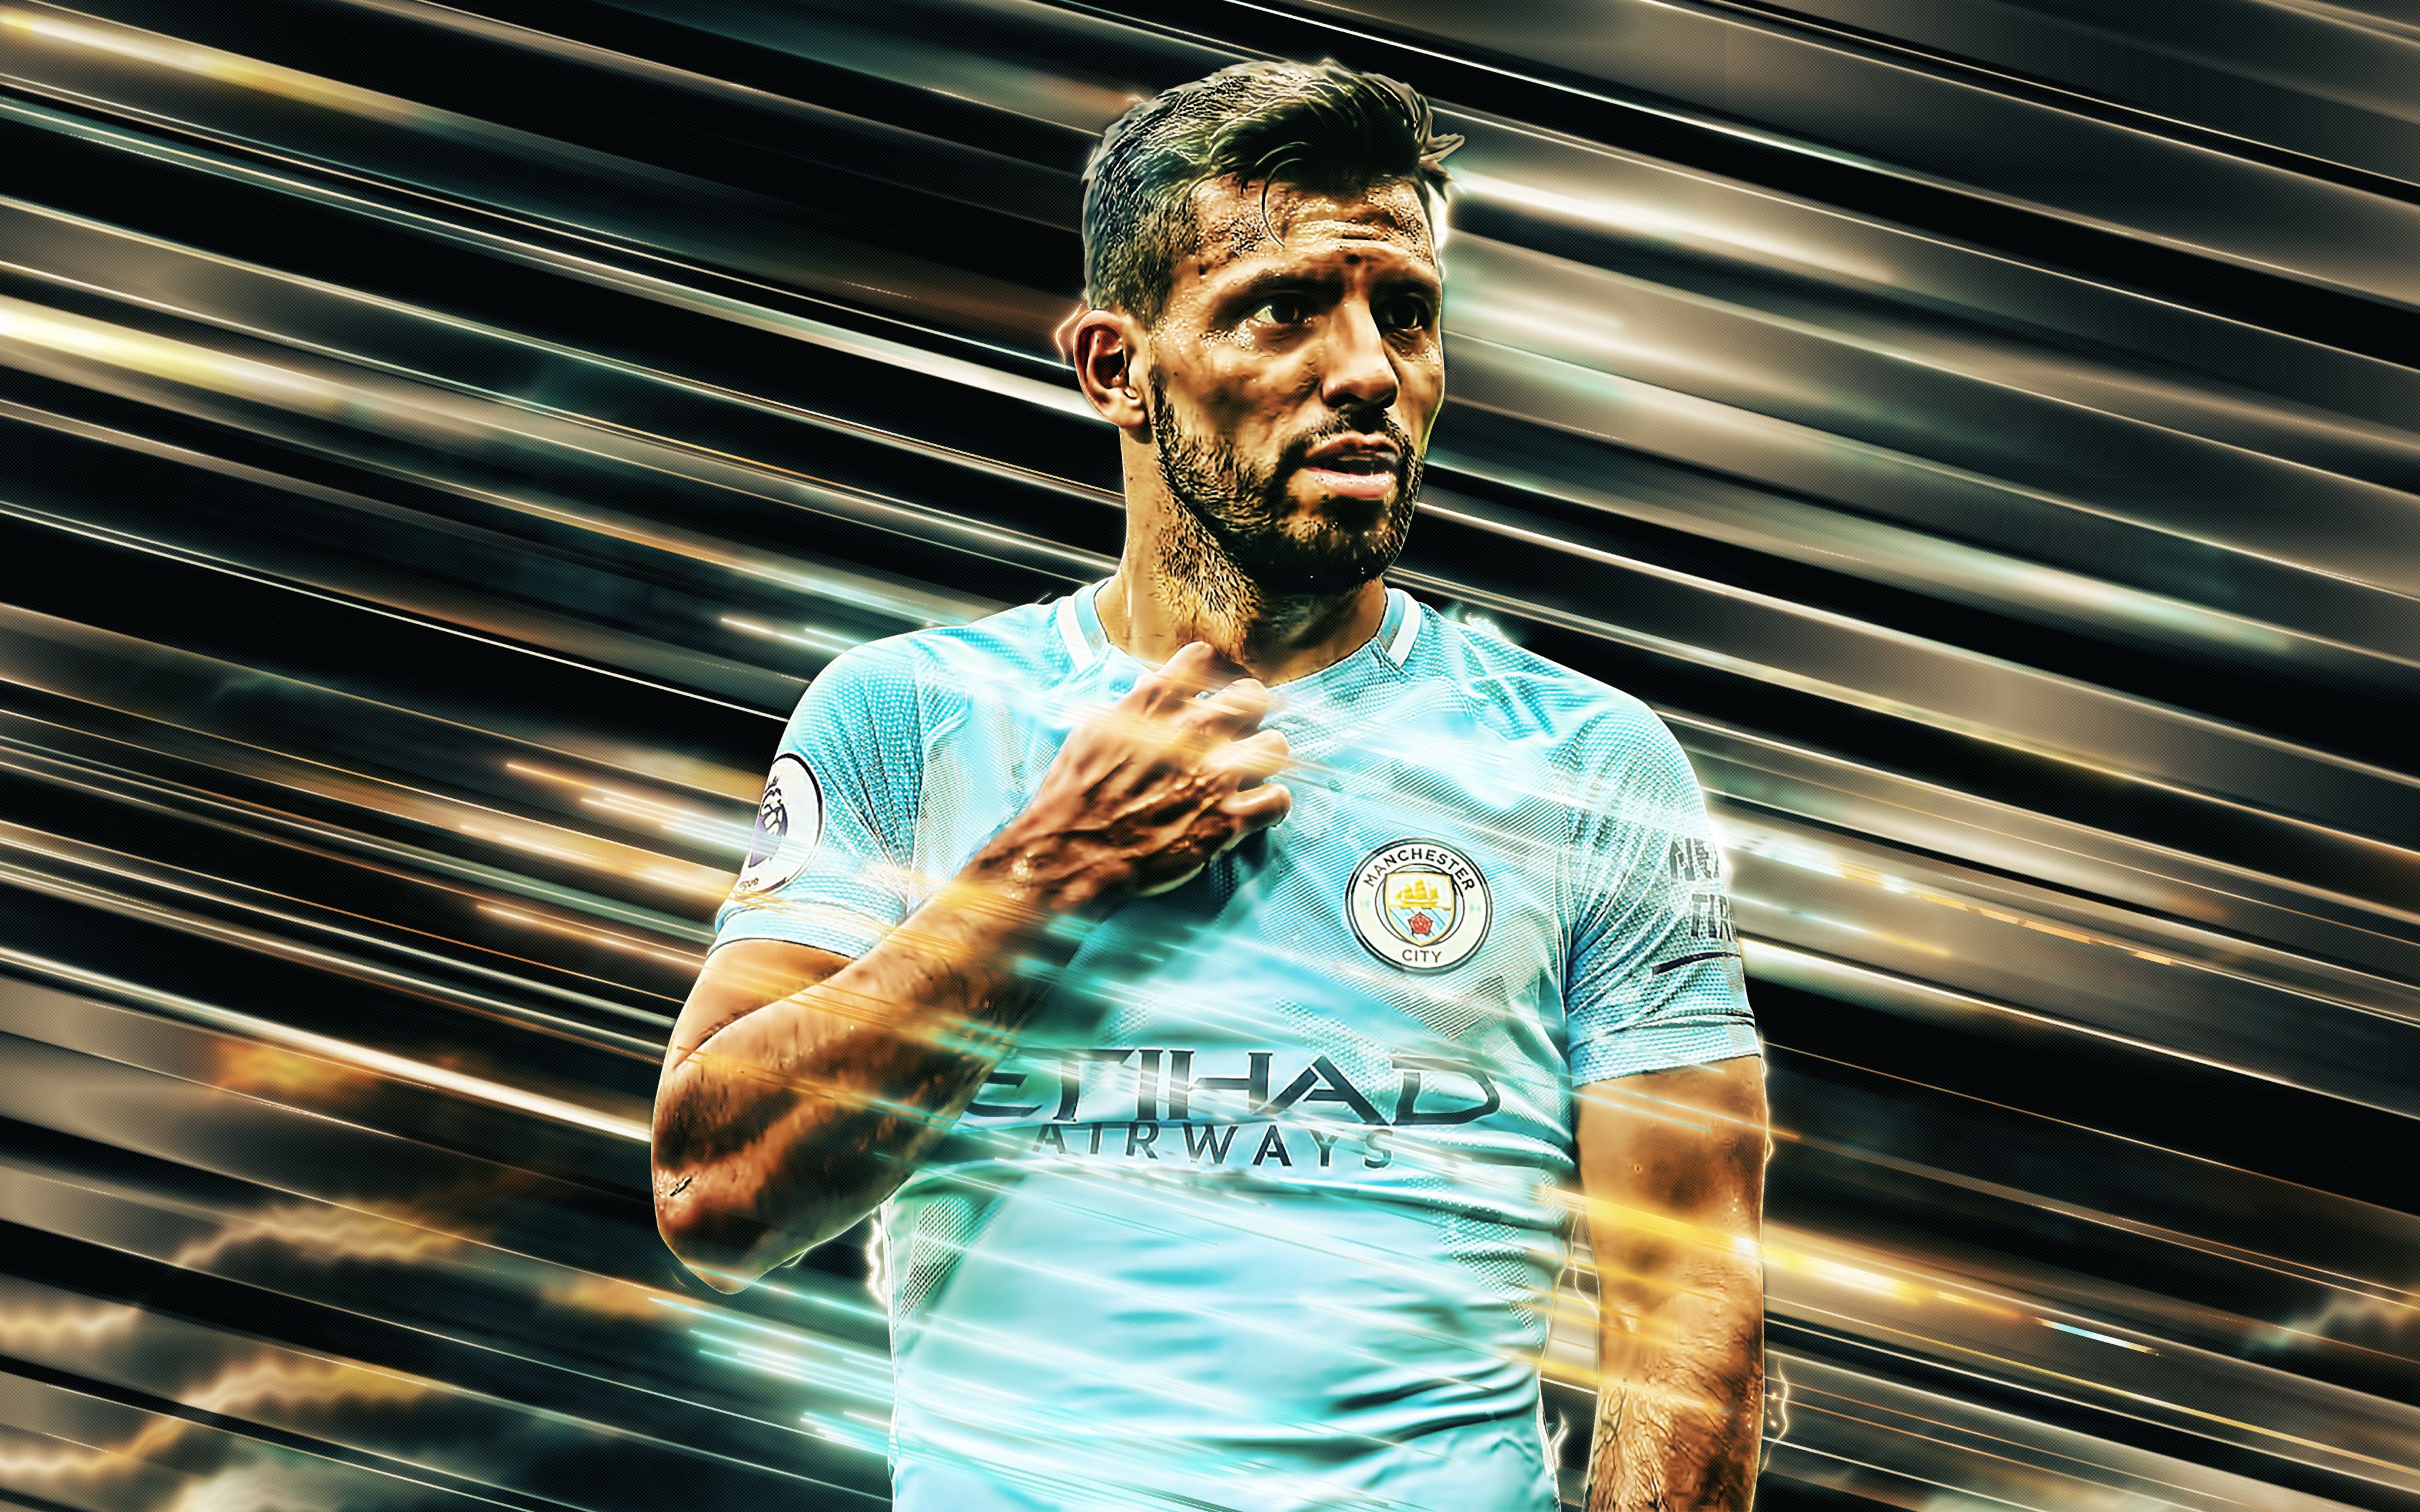 Found this wallpaper online and just wanted to share it in case anyone else  wanted to use it. (Note: I did not make this. Simply found it online) :  r/MCFC